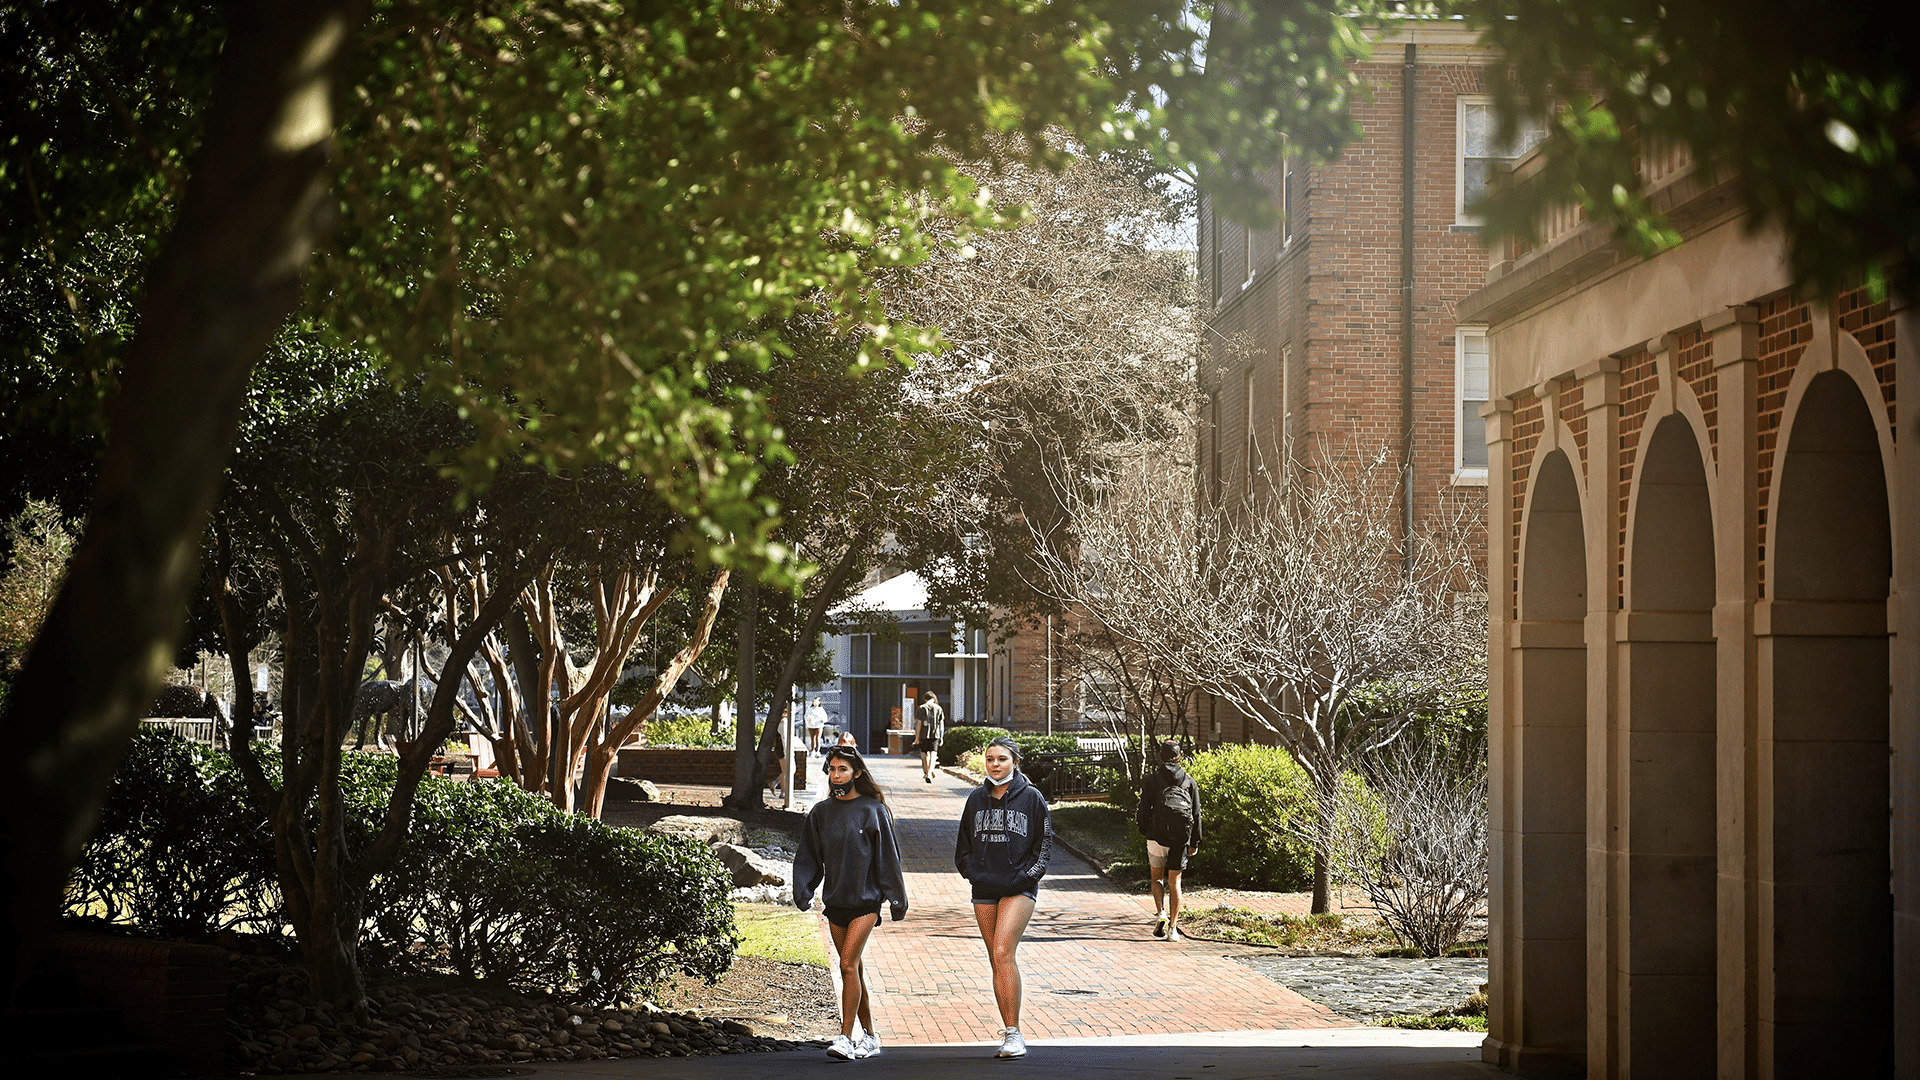 Students walk through Main Campus on a bright day.